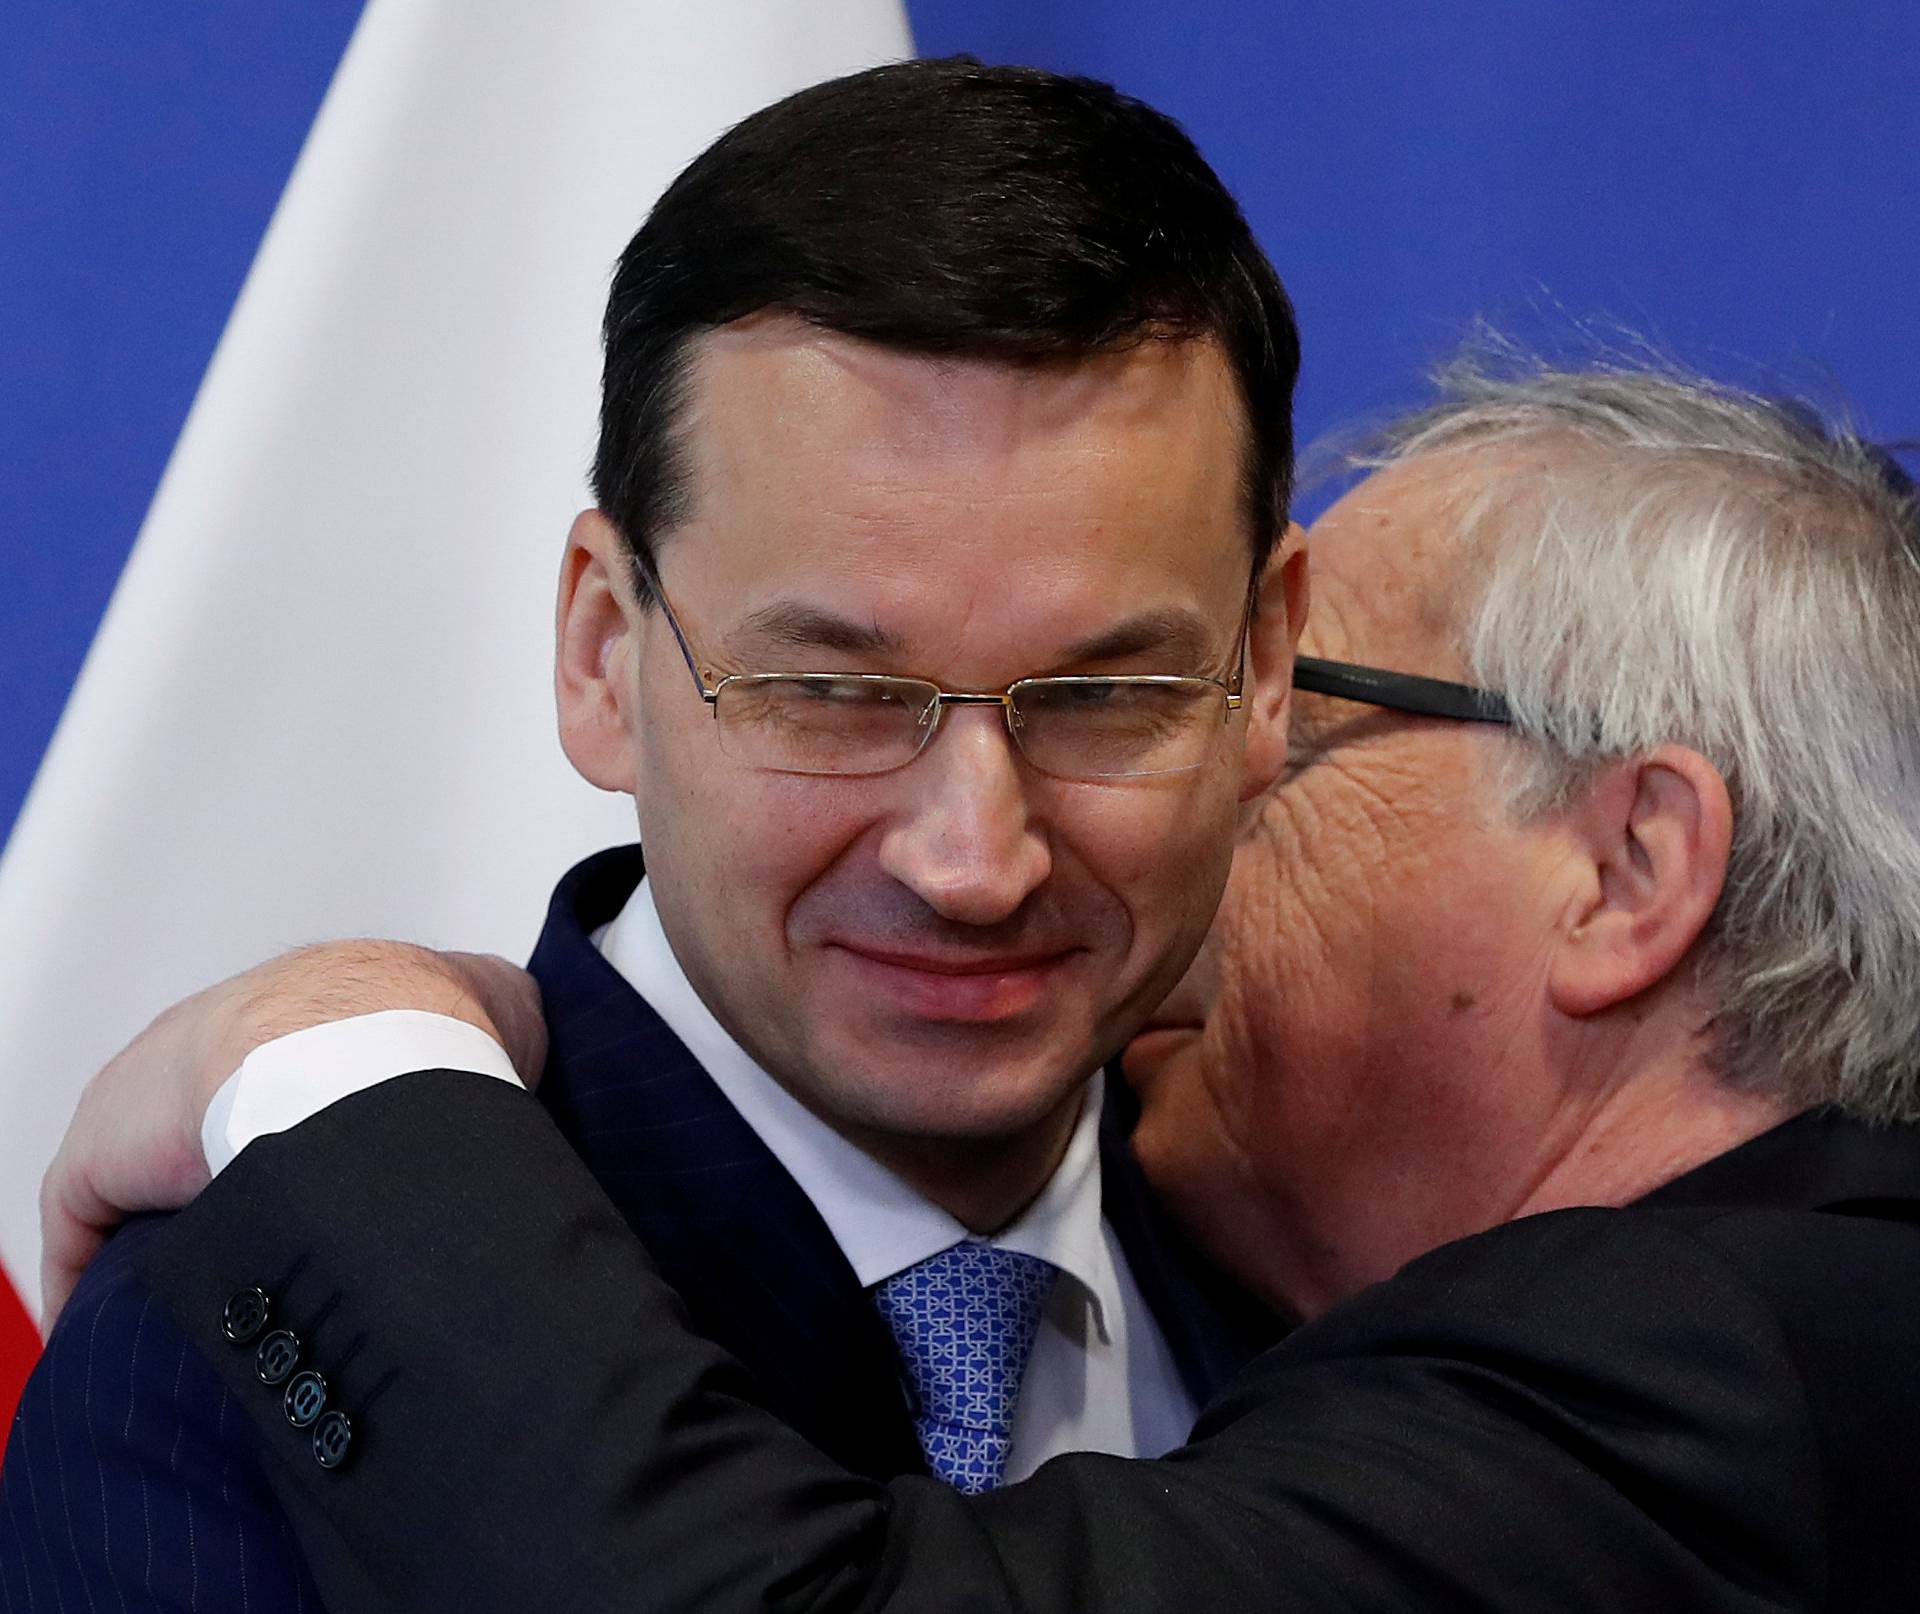 FILE PHOTO: Poland's Prime Minister Morawiecki is welcomed by European Commission President Juncker in Brussels